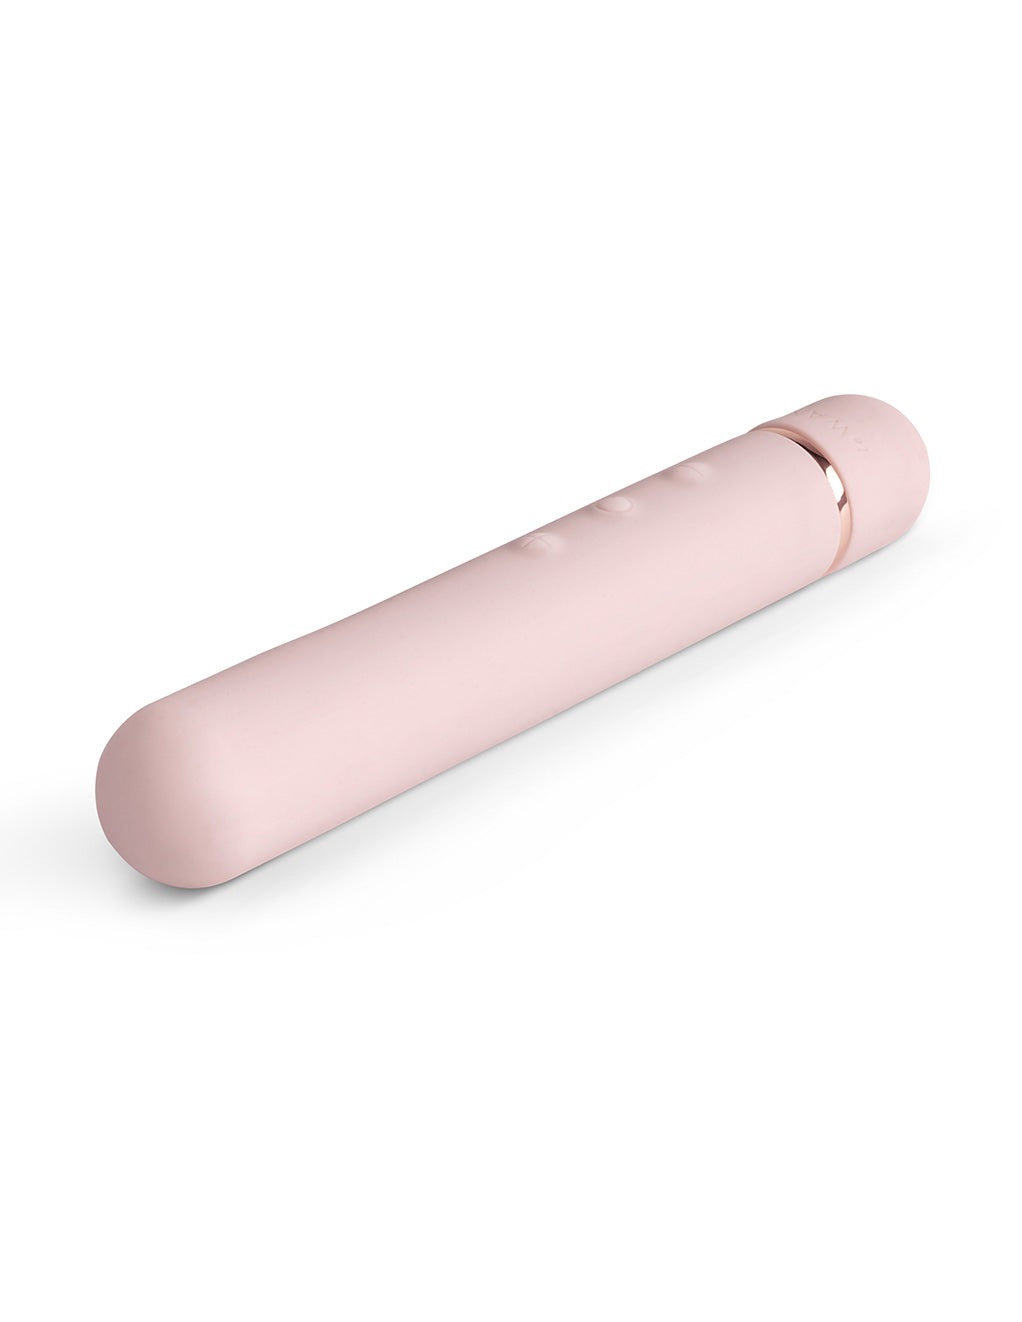 Le Wand Baton Rechargeable Clitoral Vibrator- Rose Gold- Top